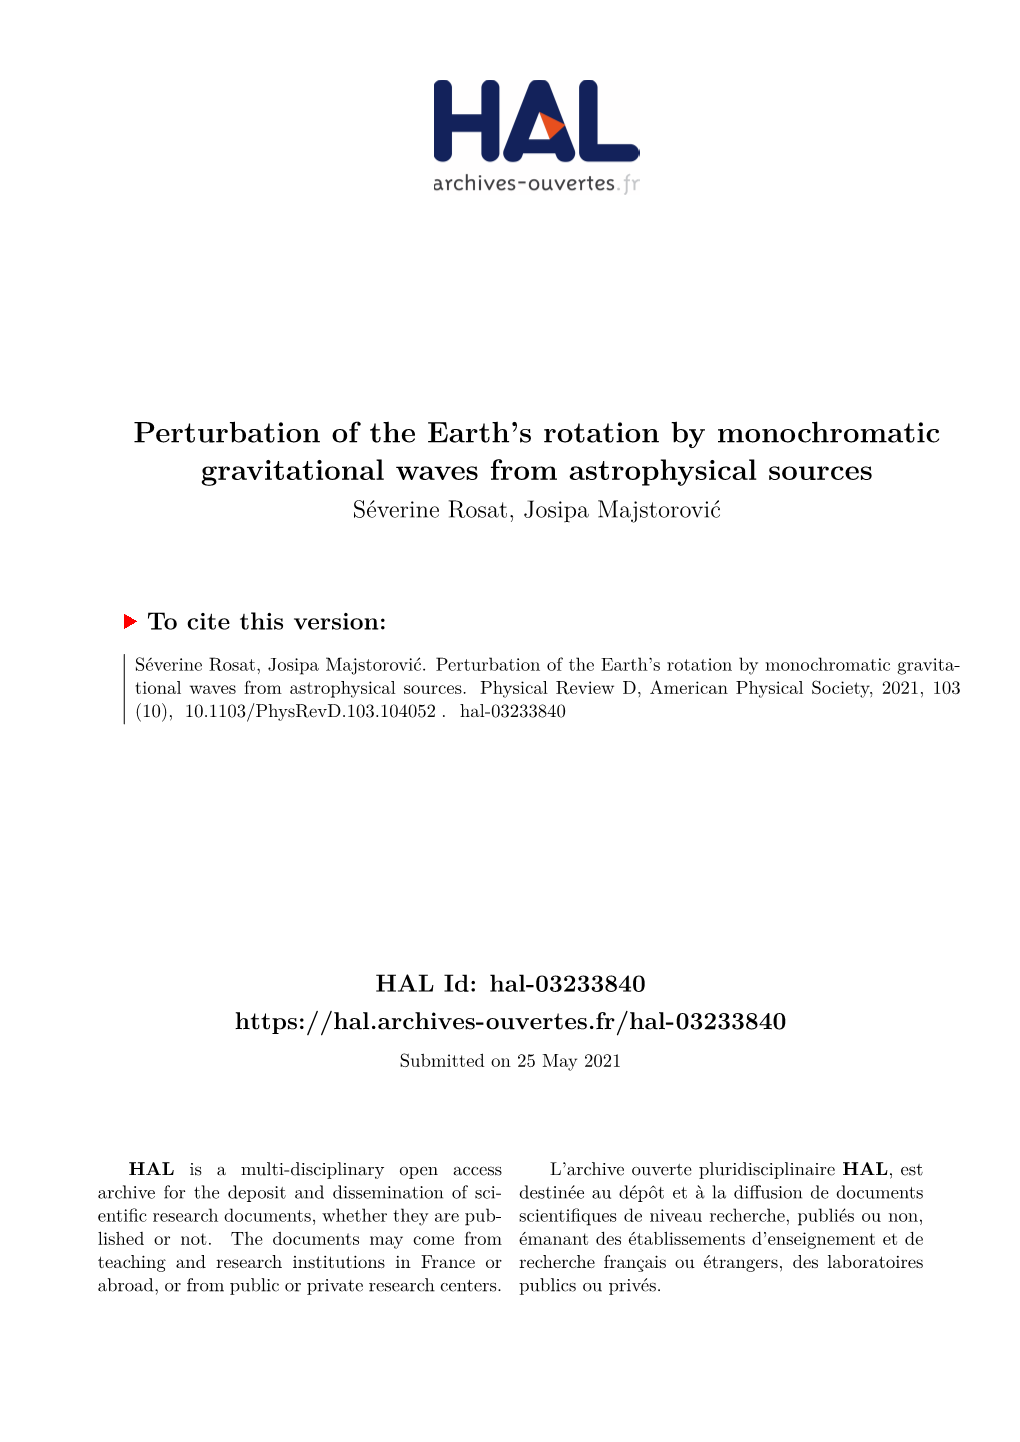 Perturbation of the Earth's Rotation by Monochromatic Gravitational Waves from Astrophysical Sources